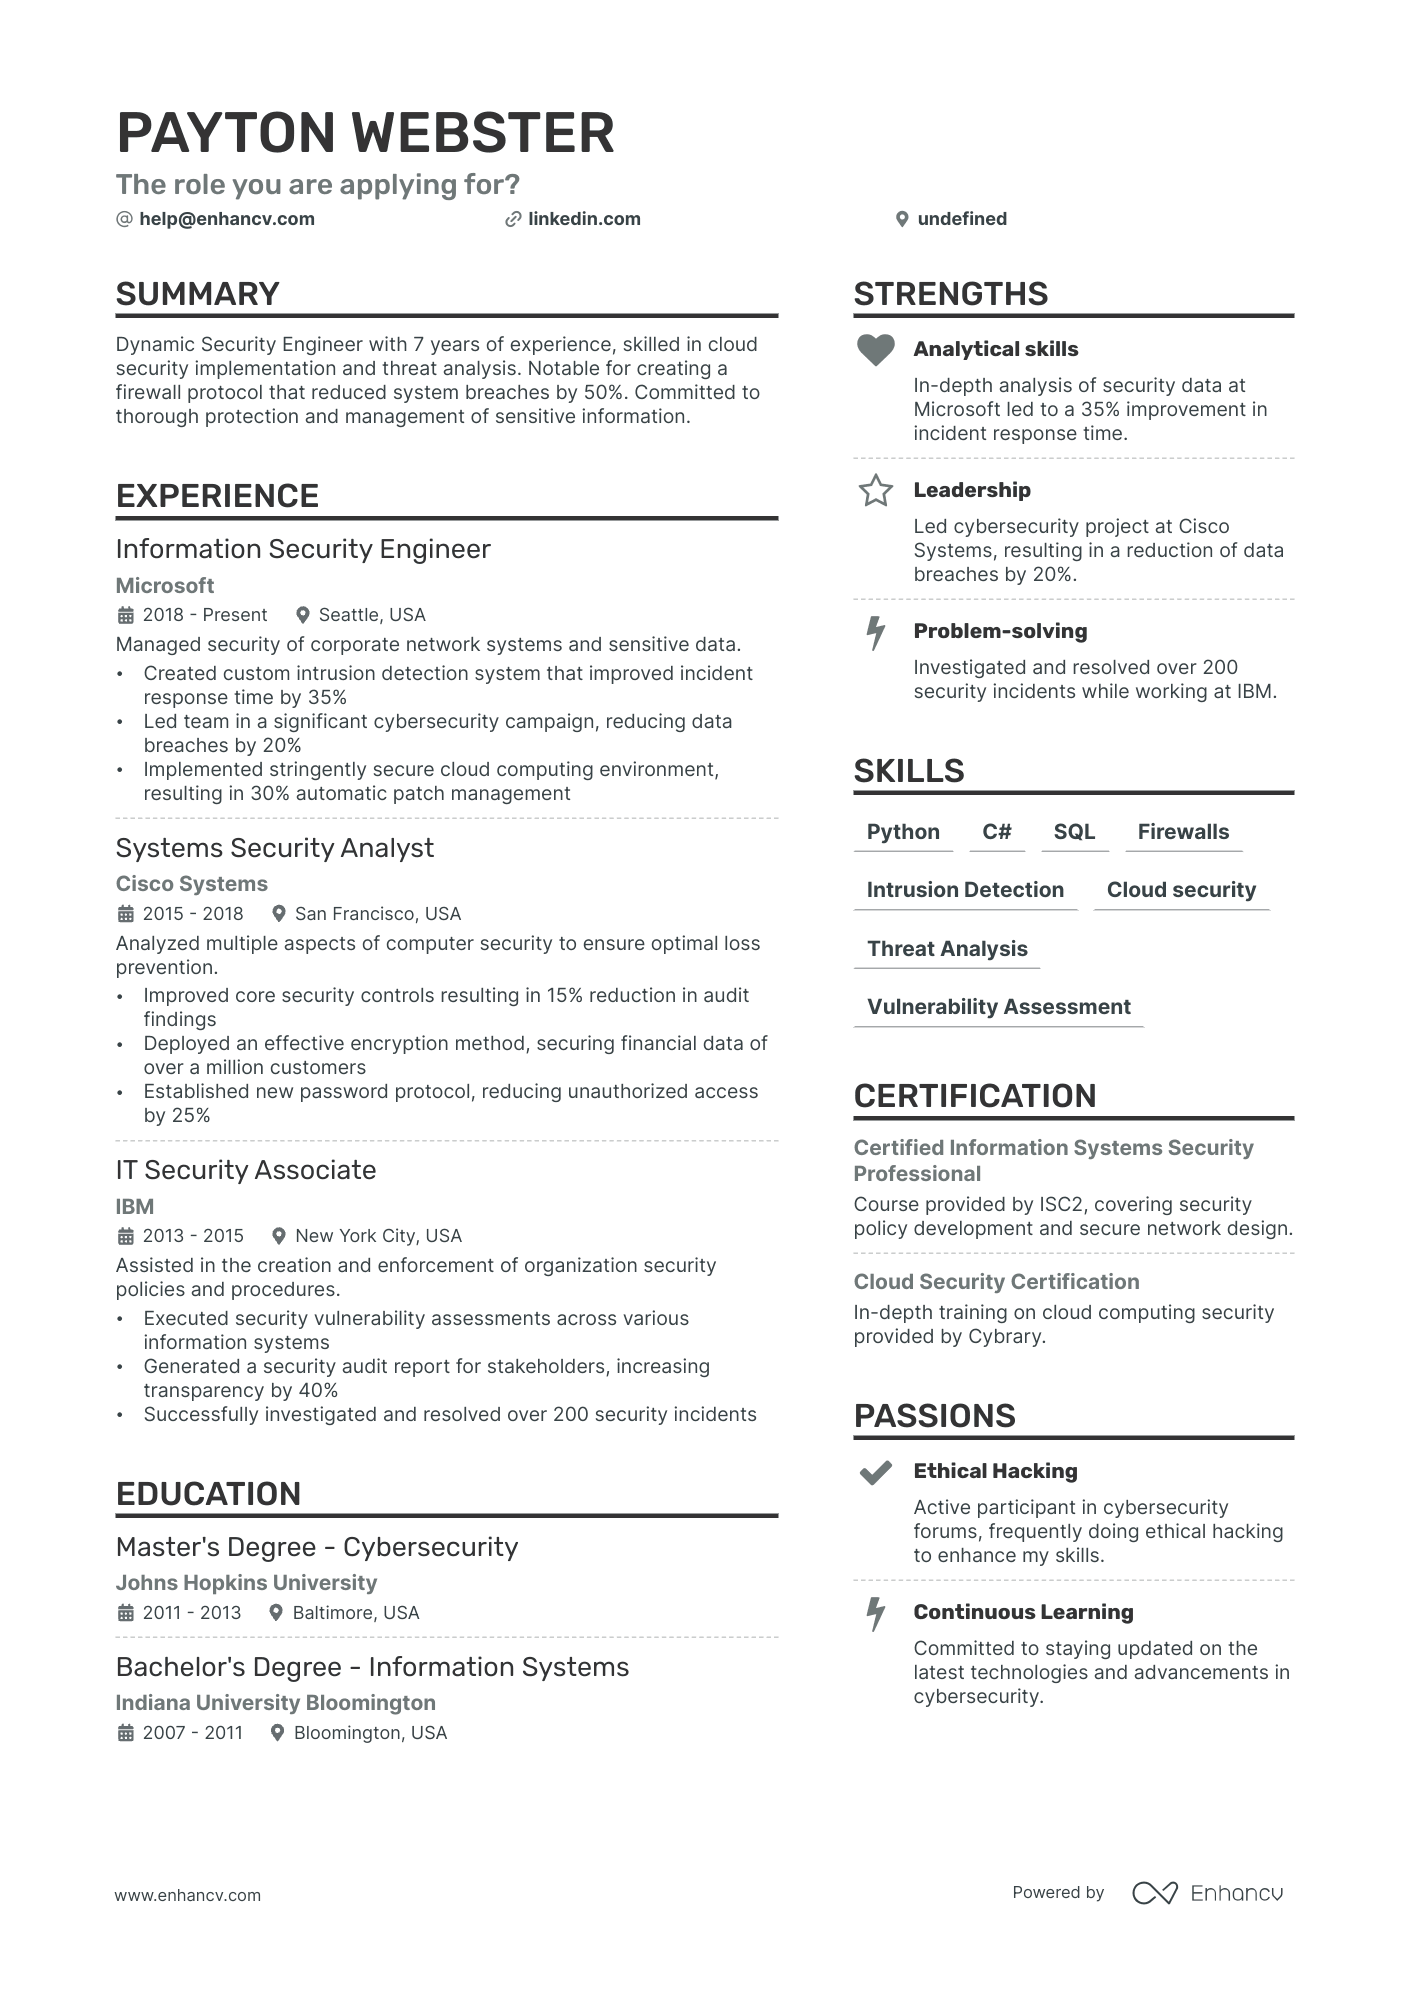 Information Security Engineer resume example